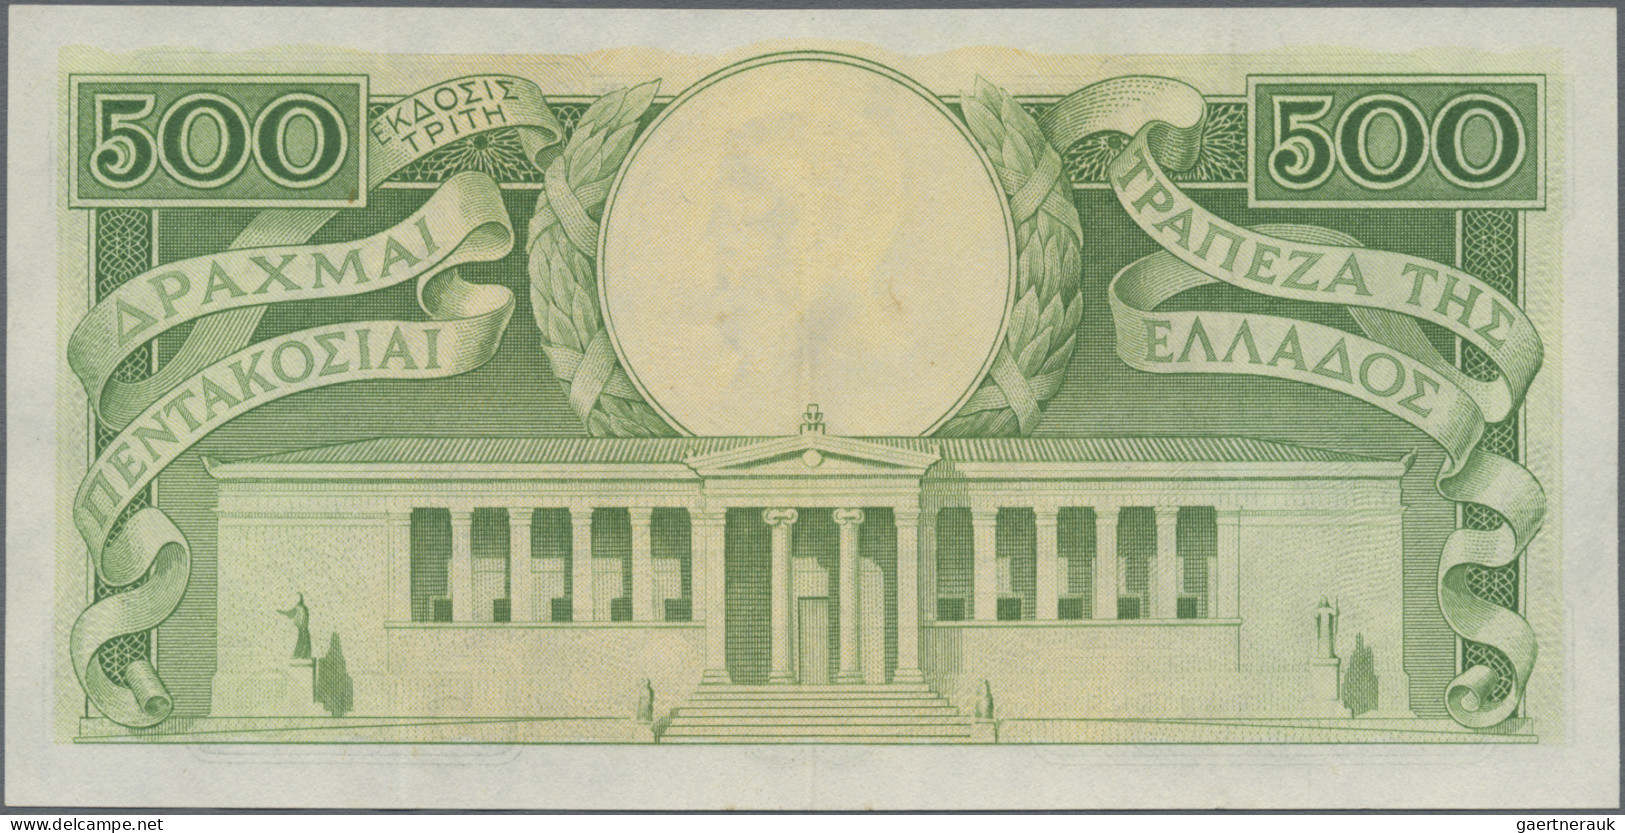 Greece: Bank of Greece, lot with 4 banknotes, series 1941-1945, with 50 Drachmai